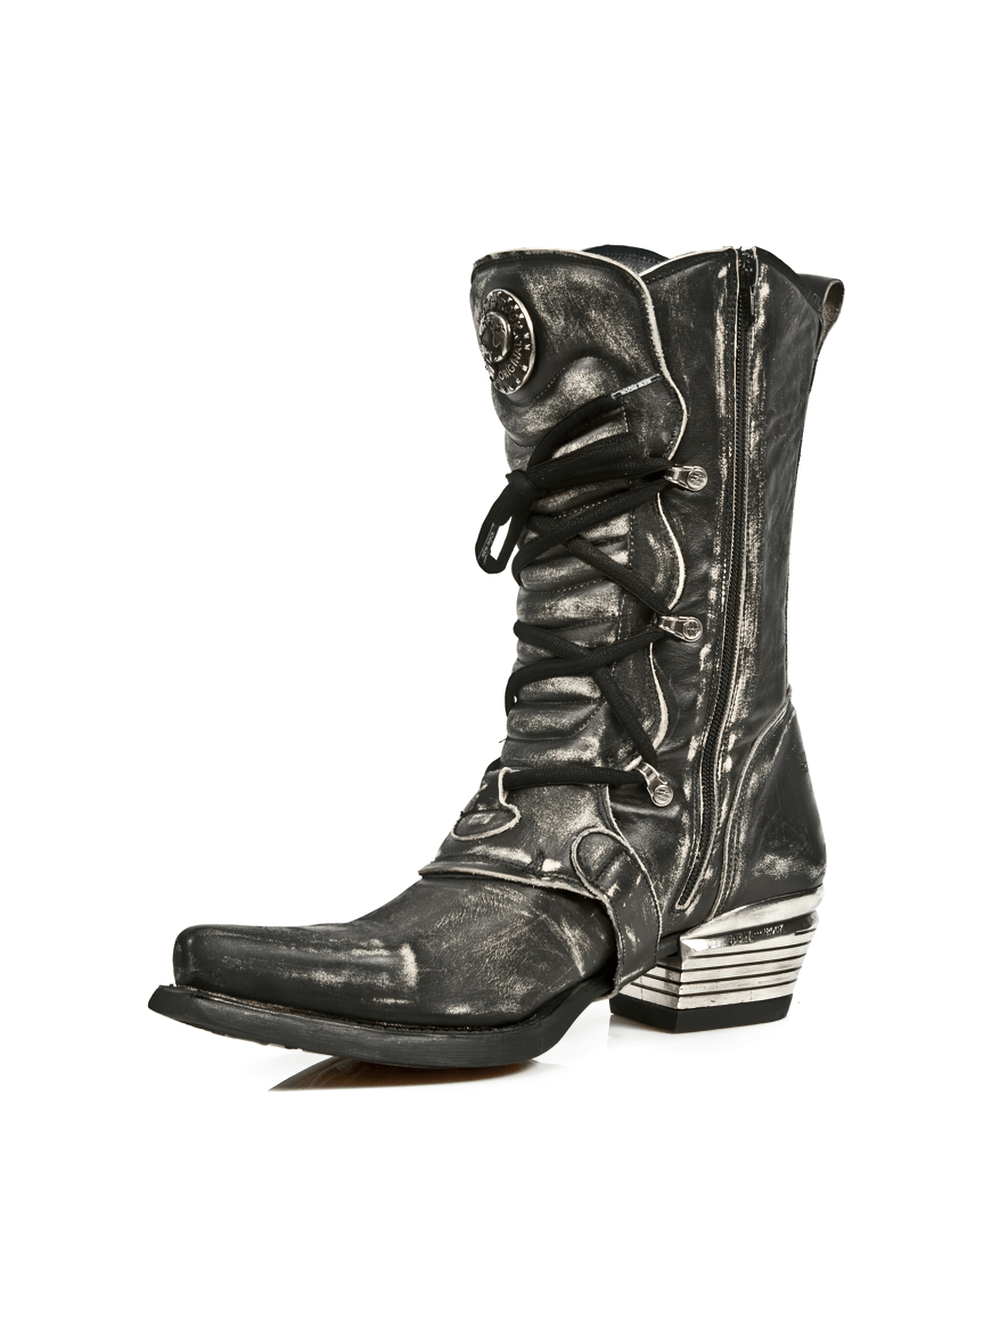 NEW ROCK Men's Urban Black Leather Buckle Boots